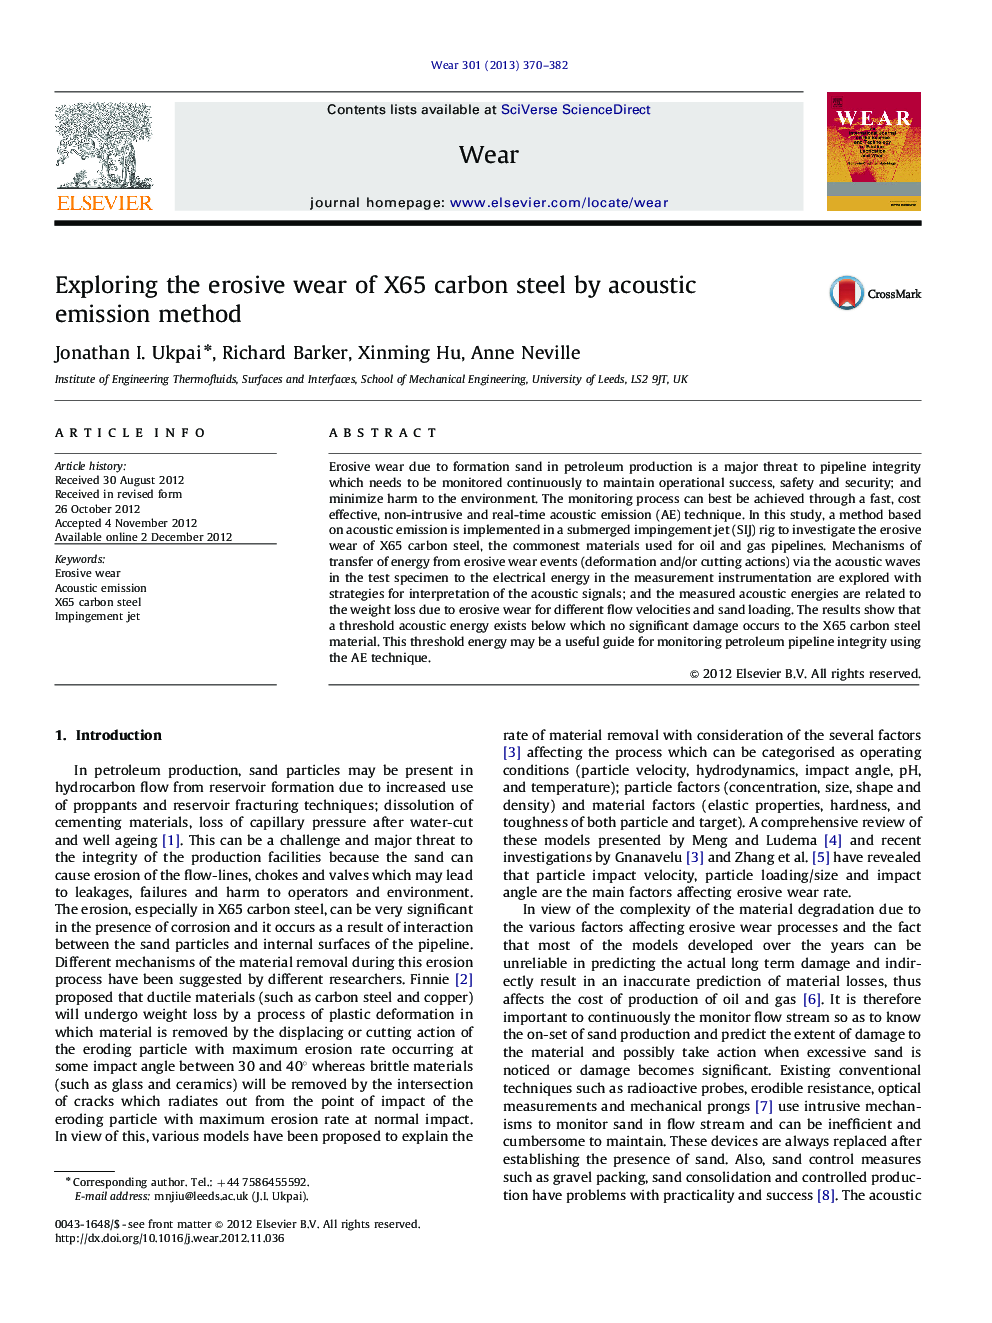 Exploring the erosive wear of X65 carbon steel by acoustic emission method